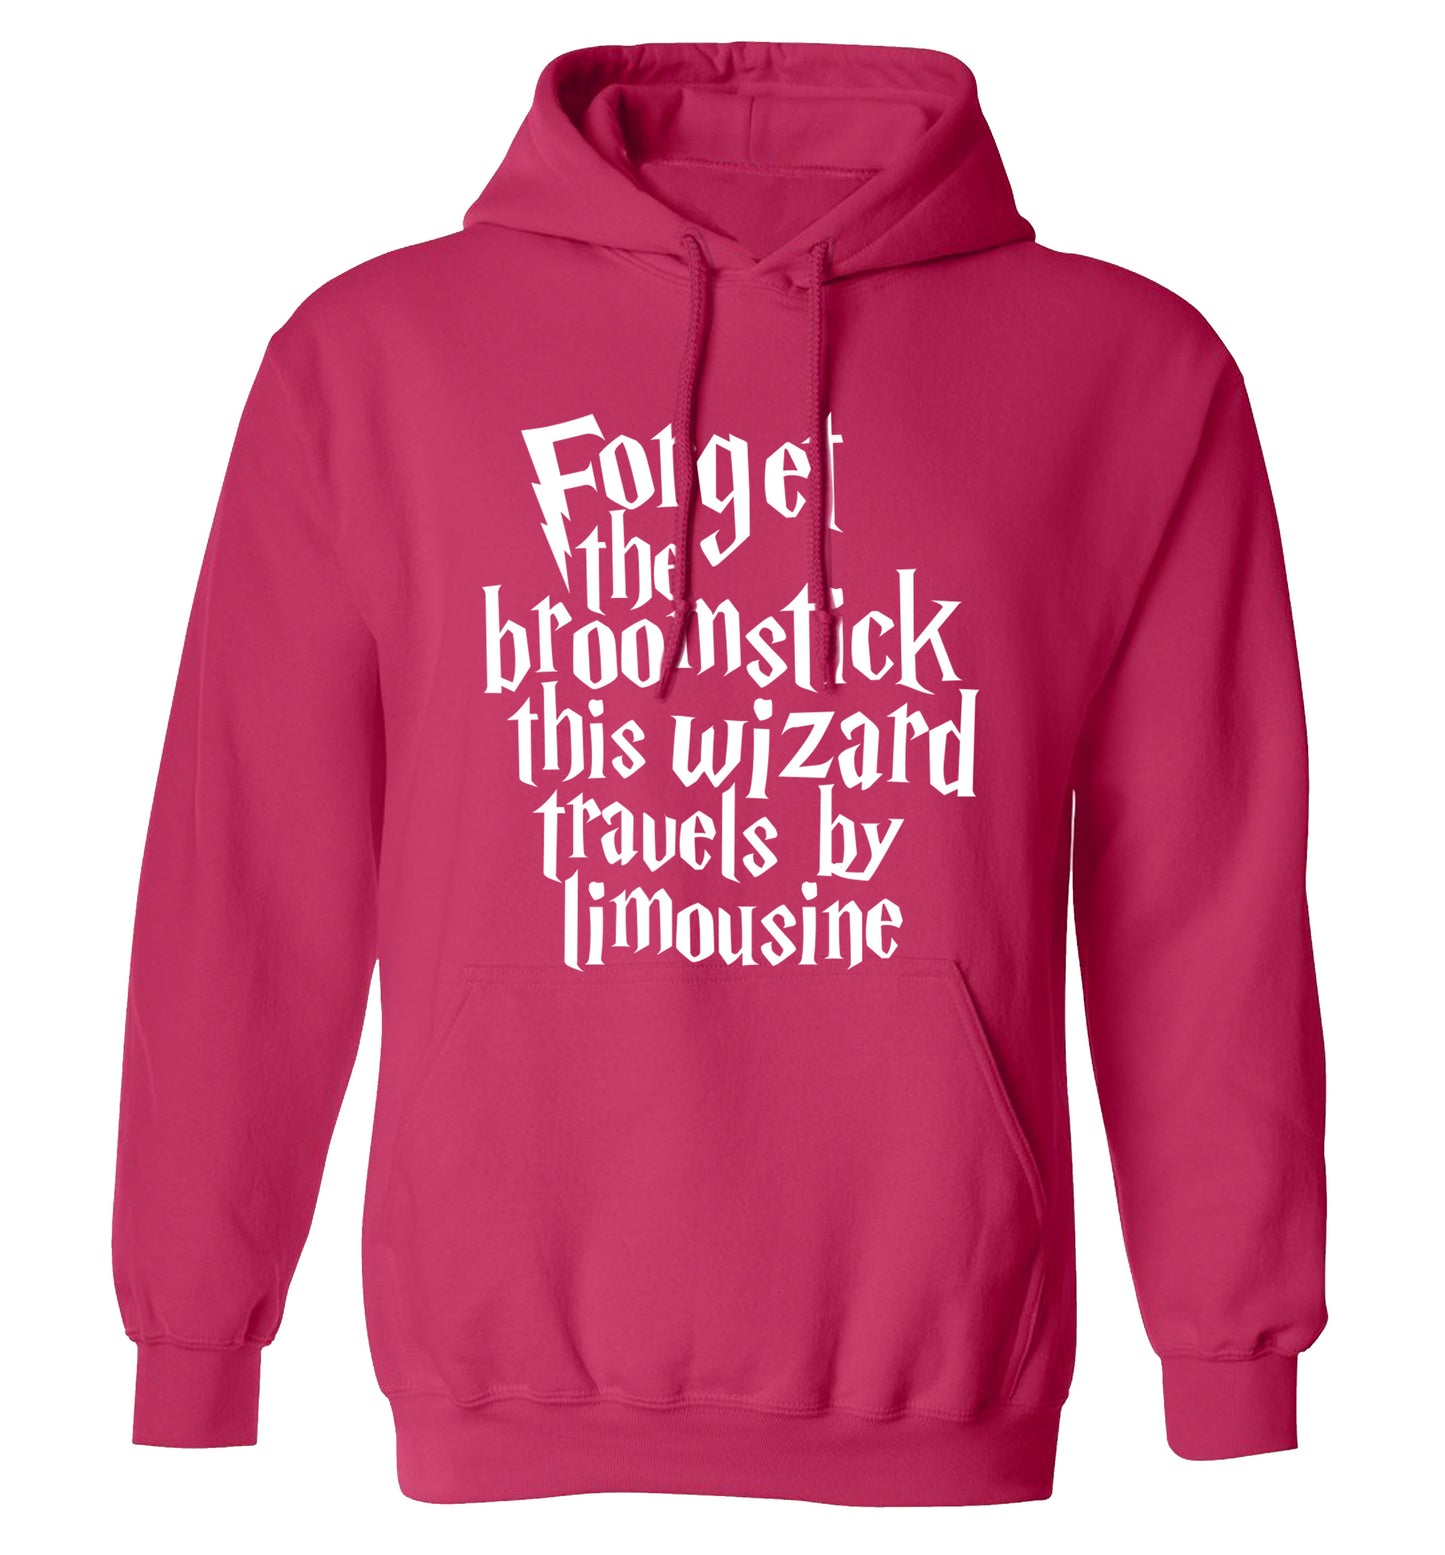 Forget the broomstick this wizard travels by limousine adults unisexpink hoodie 2XL